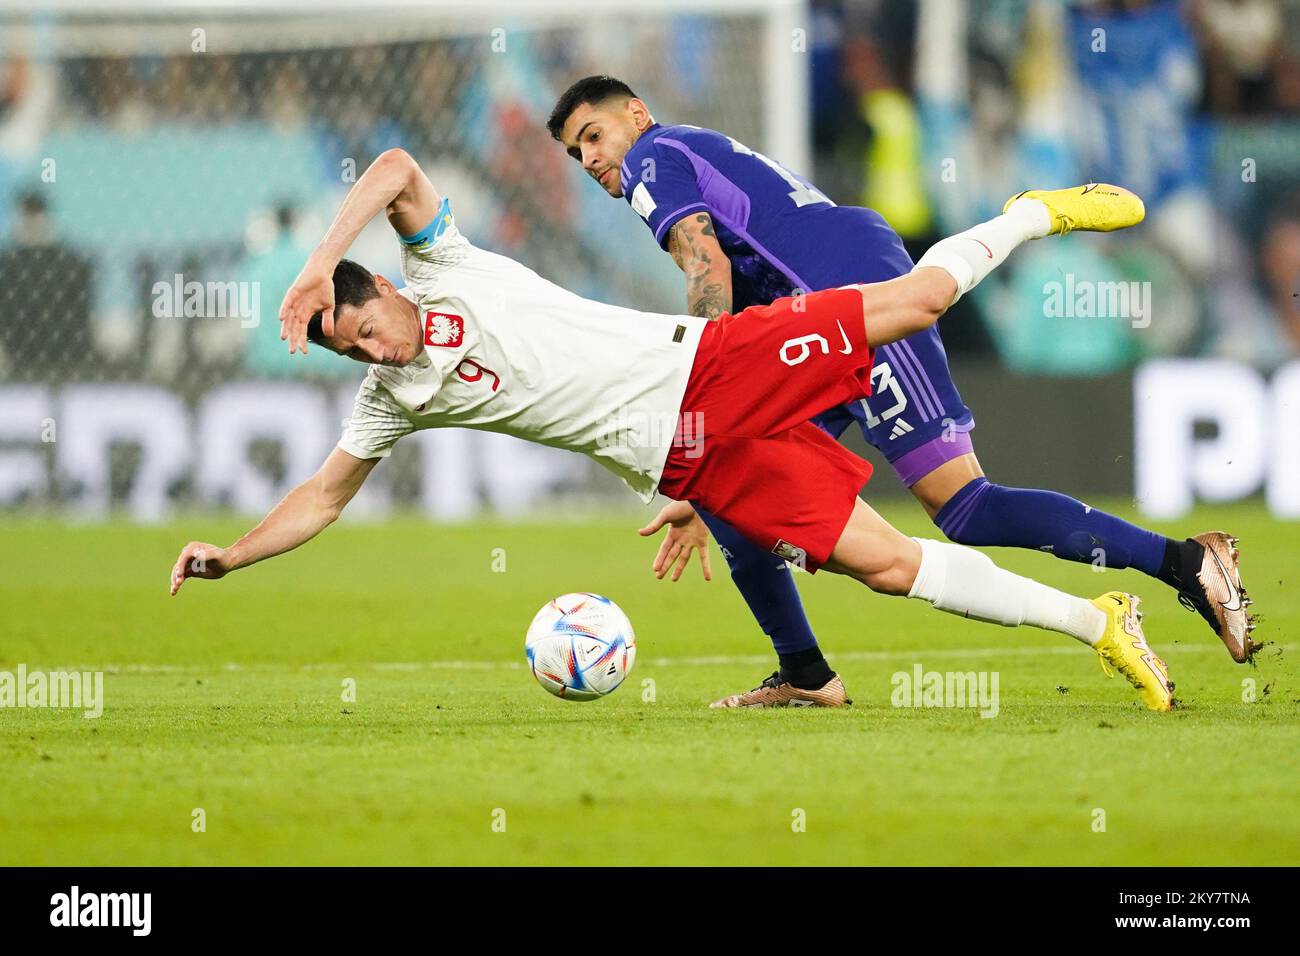 DOHA, QATAR - NOVEMBER 30: Player of Argentina Cristian Romero fights for the ball with player of Poland Robert Lewandowski during the FIFA World Cup Qatar 2022 group C match between Argentina and Poland at Stadium 974 on November 30, 2022 in Doha, Qatar. (Photo by Florencia Tan Jun/PxImages) Credit: Px Images/Alamy Live News Stock Photo